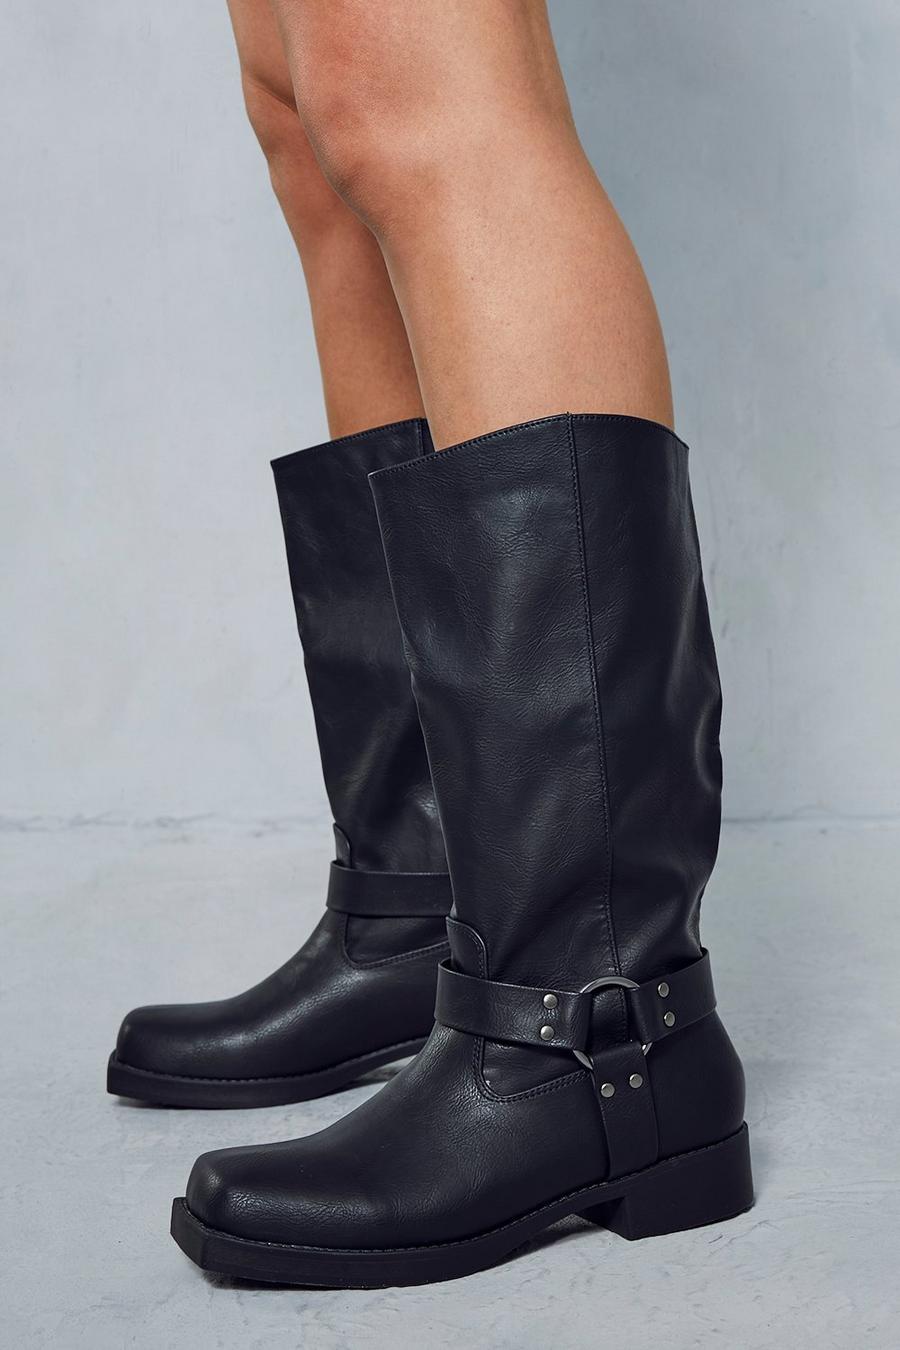 Black Leather Look Square Toe Buckle Knee High Boots